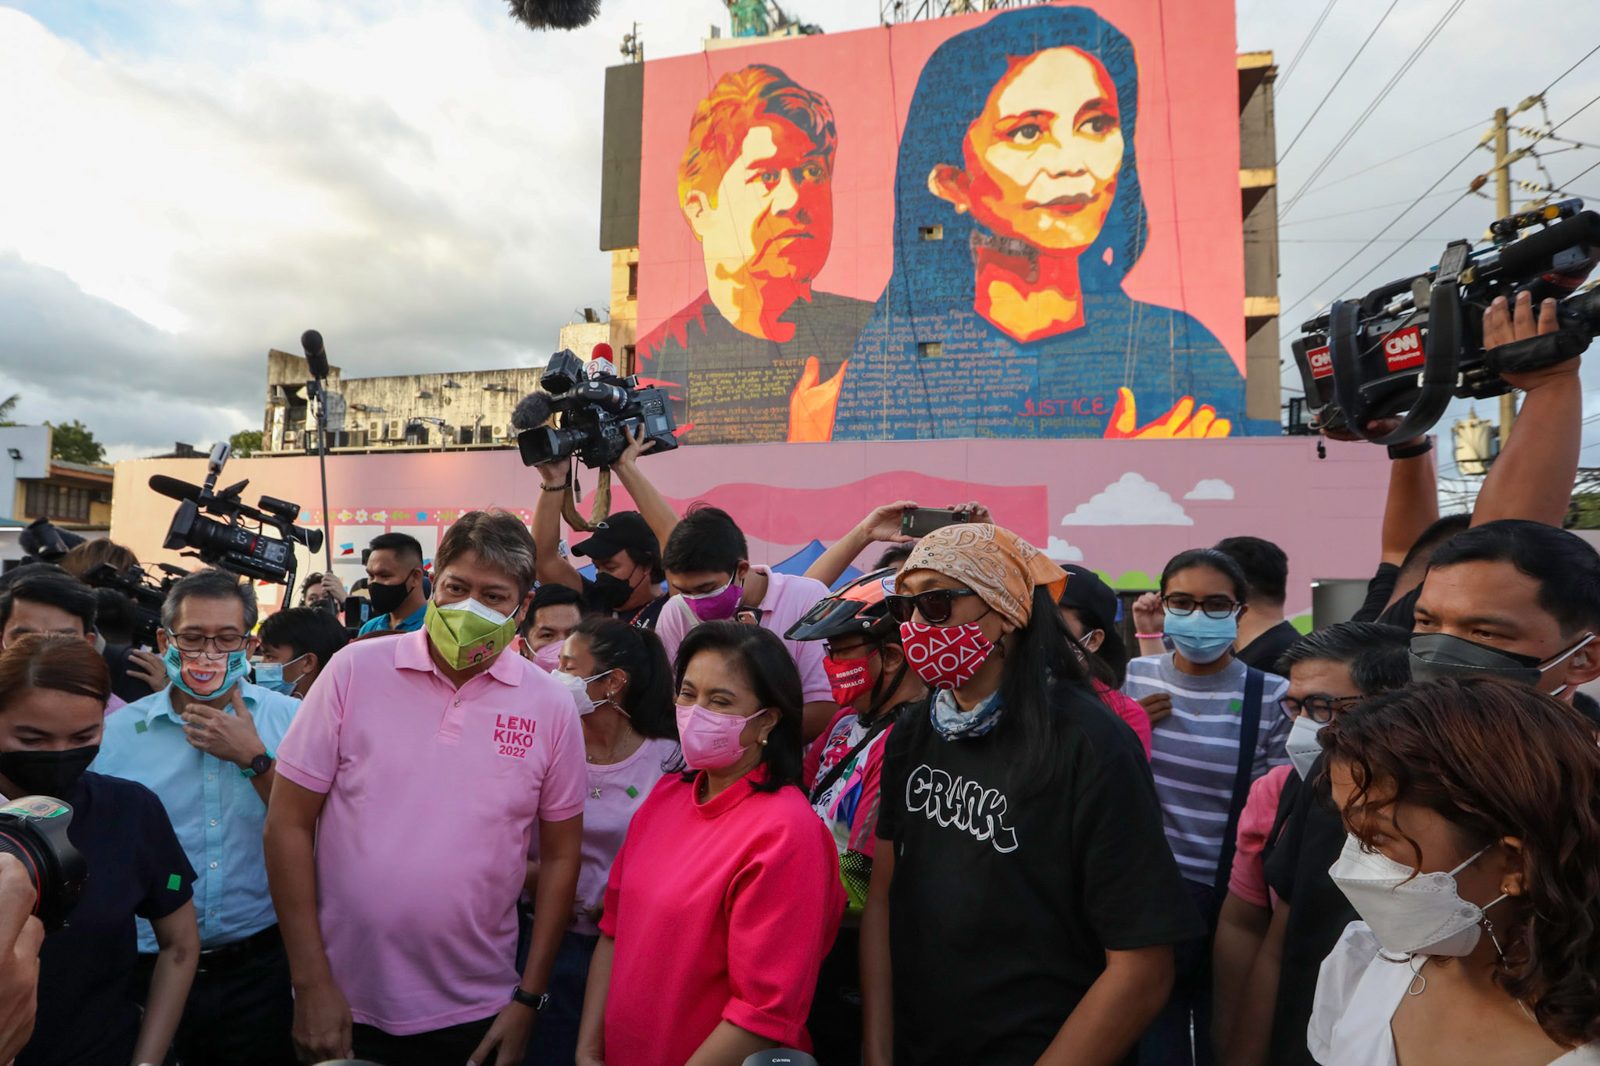 Leni-Kiko murals in QC are a ‘labor of love’ for artists seeking change in 2022